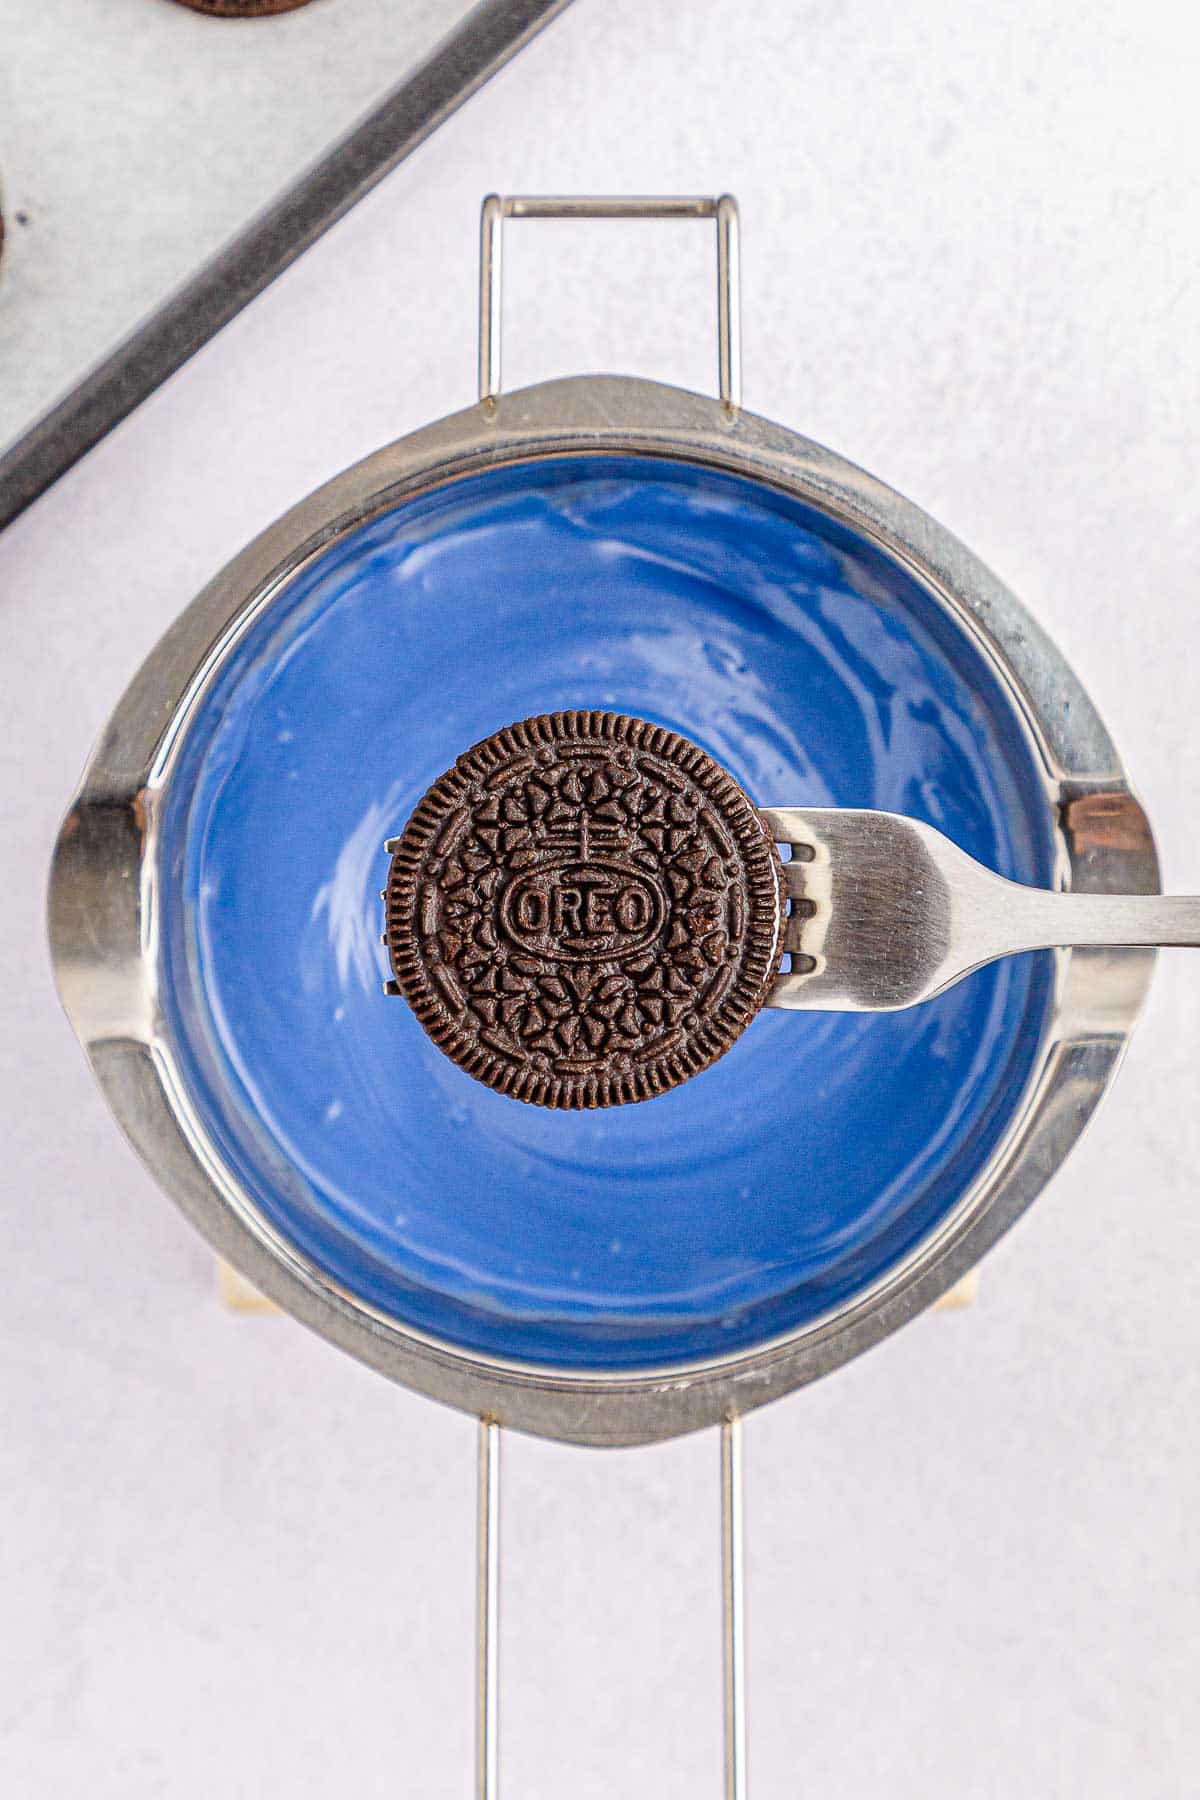 Oreo on fork being held over blue candy melt.